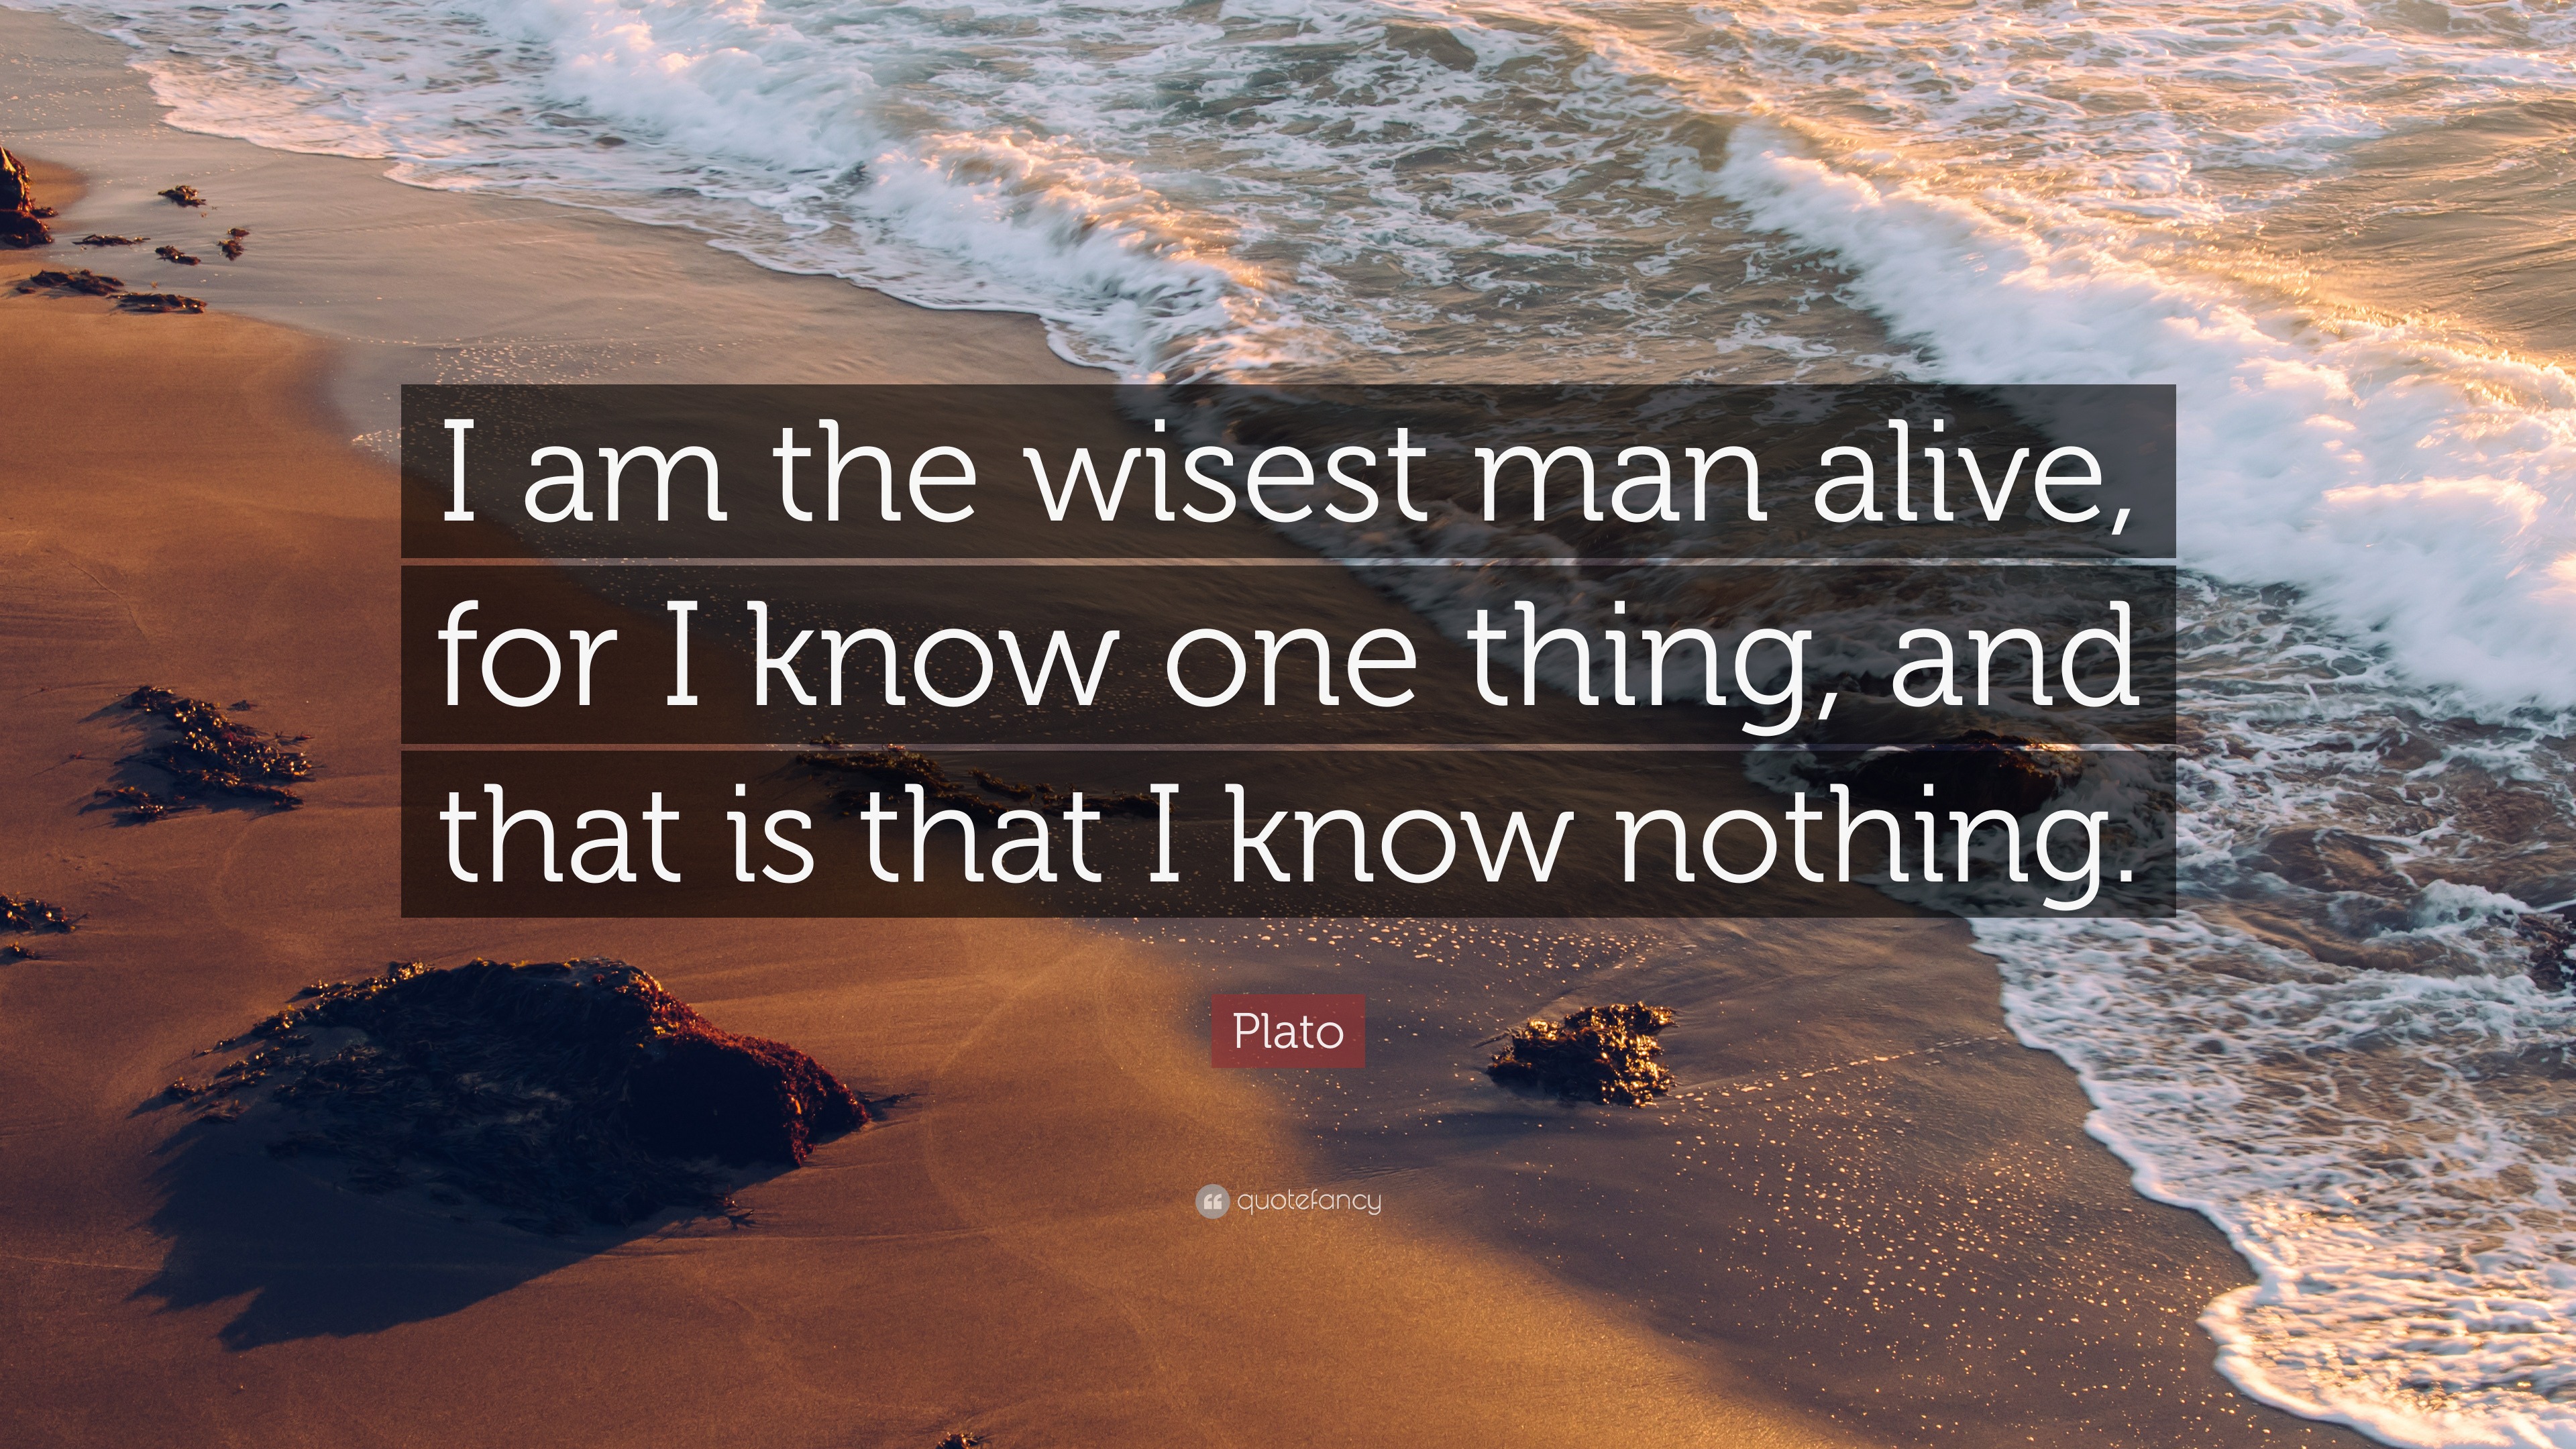 What is the wisest quote?